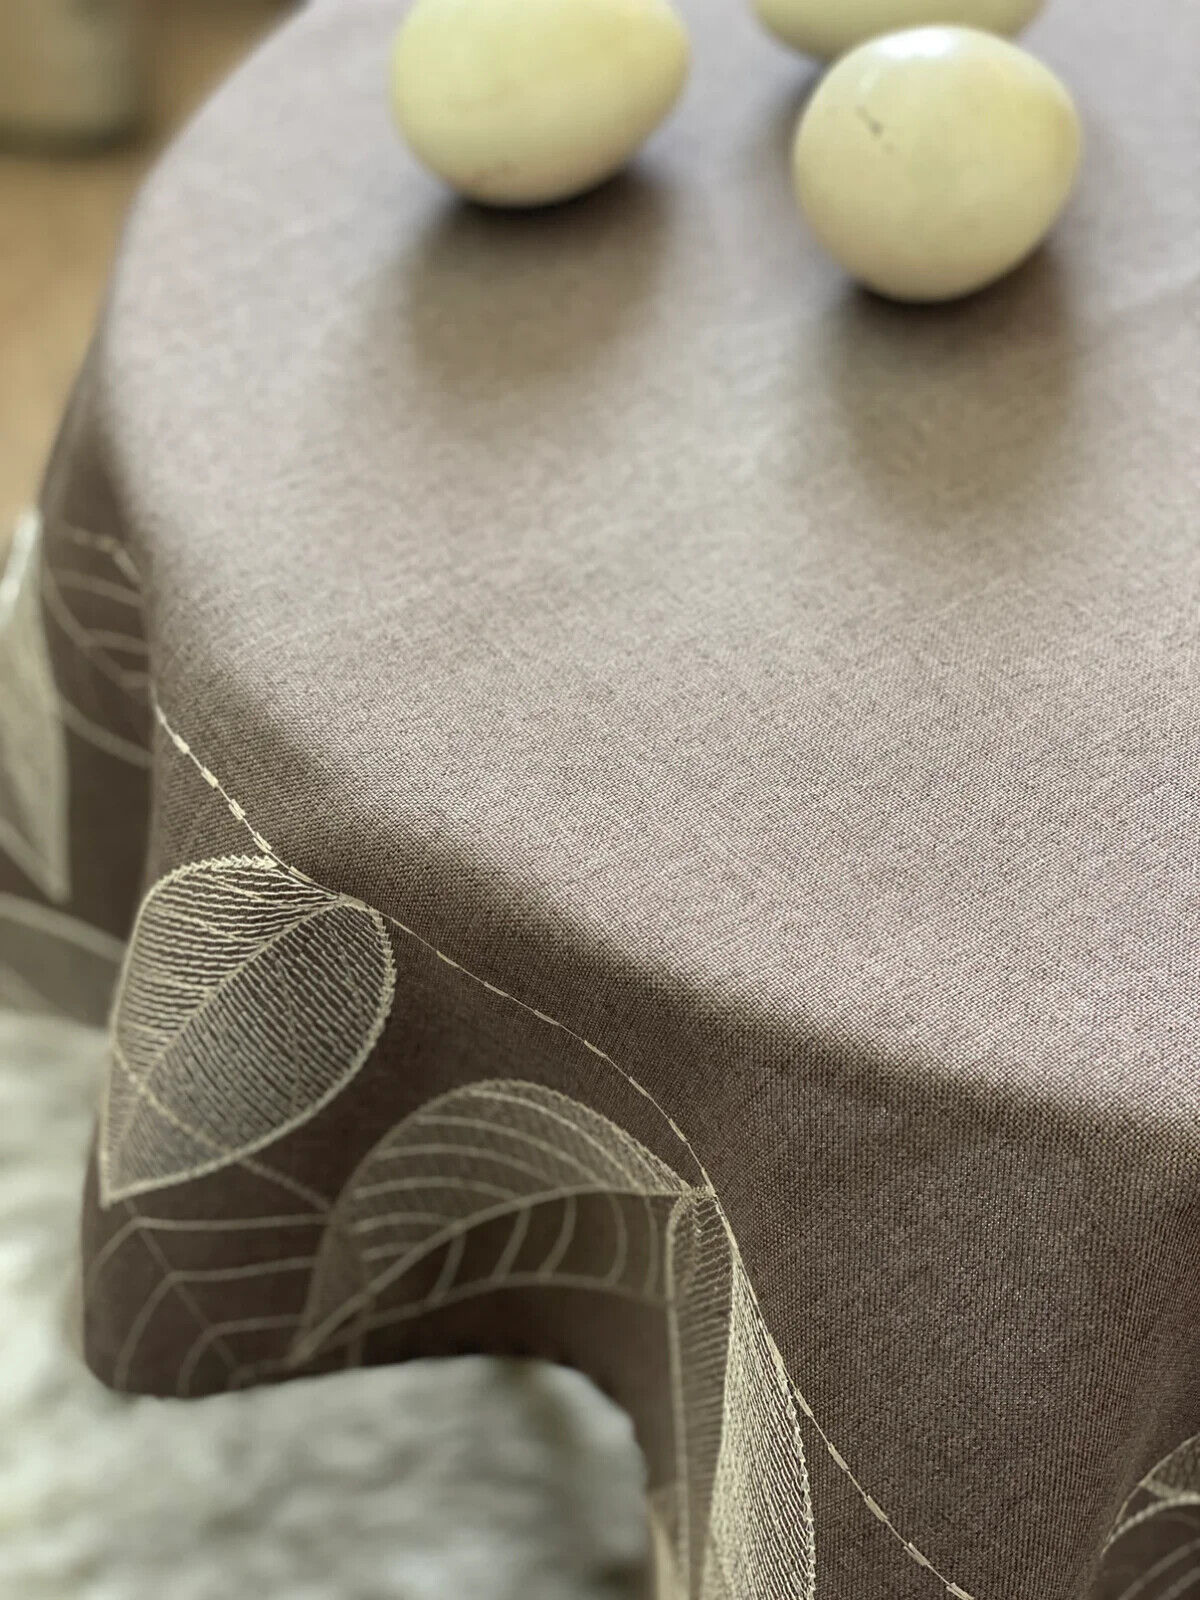 Beech Leaf Embroidered Tablecloth